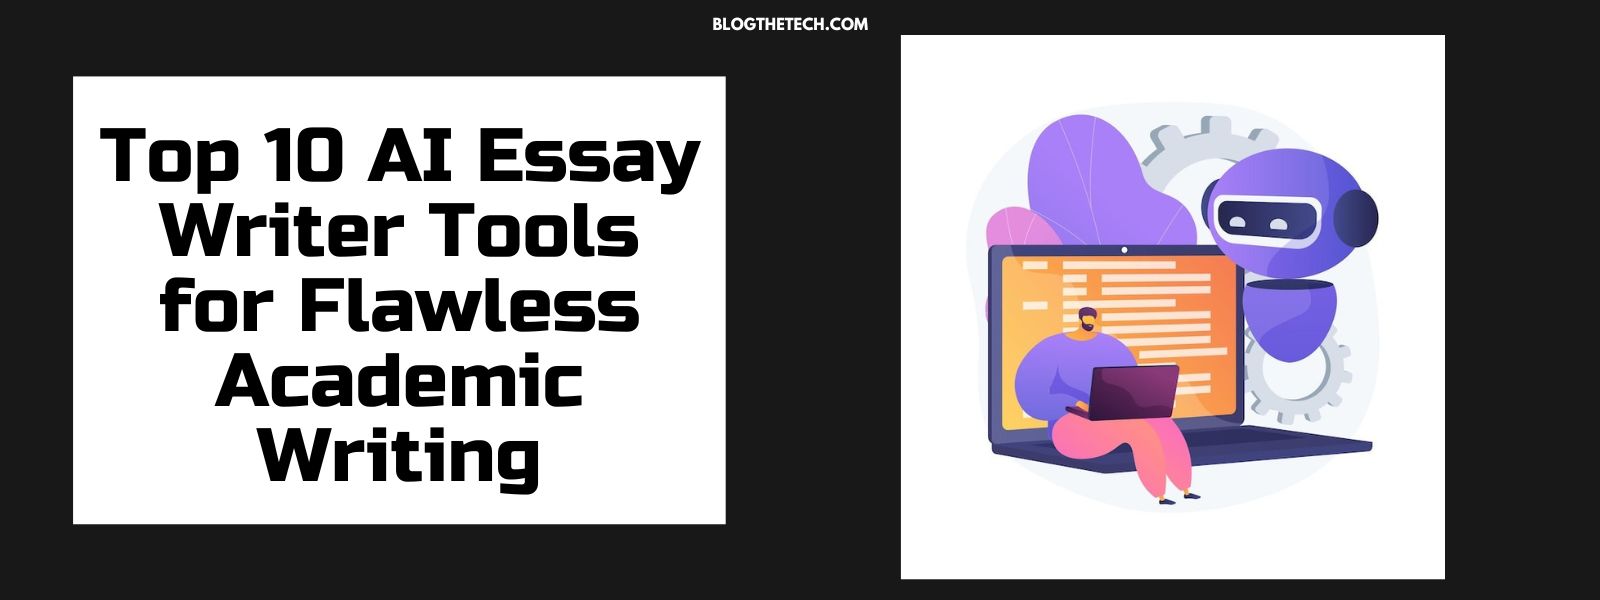 Top 10 AI Essay Writer Tools for Flawless Academic Writing